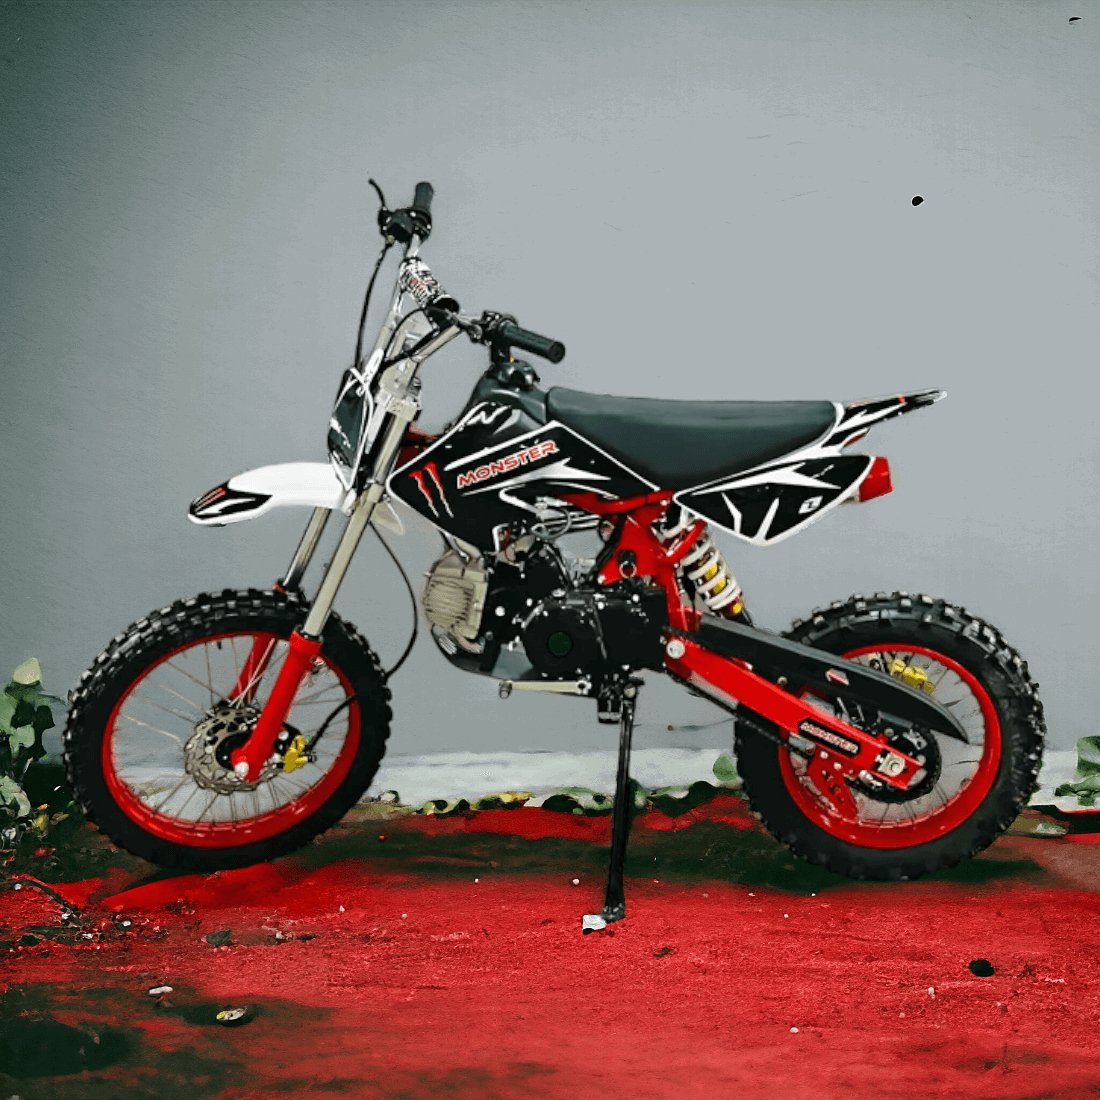 PATOYS | 125cc - Dirt bike Super Motocross for adults/youngsters 4 stroke engine for age group above 15 yrs - PATOYS